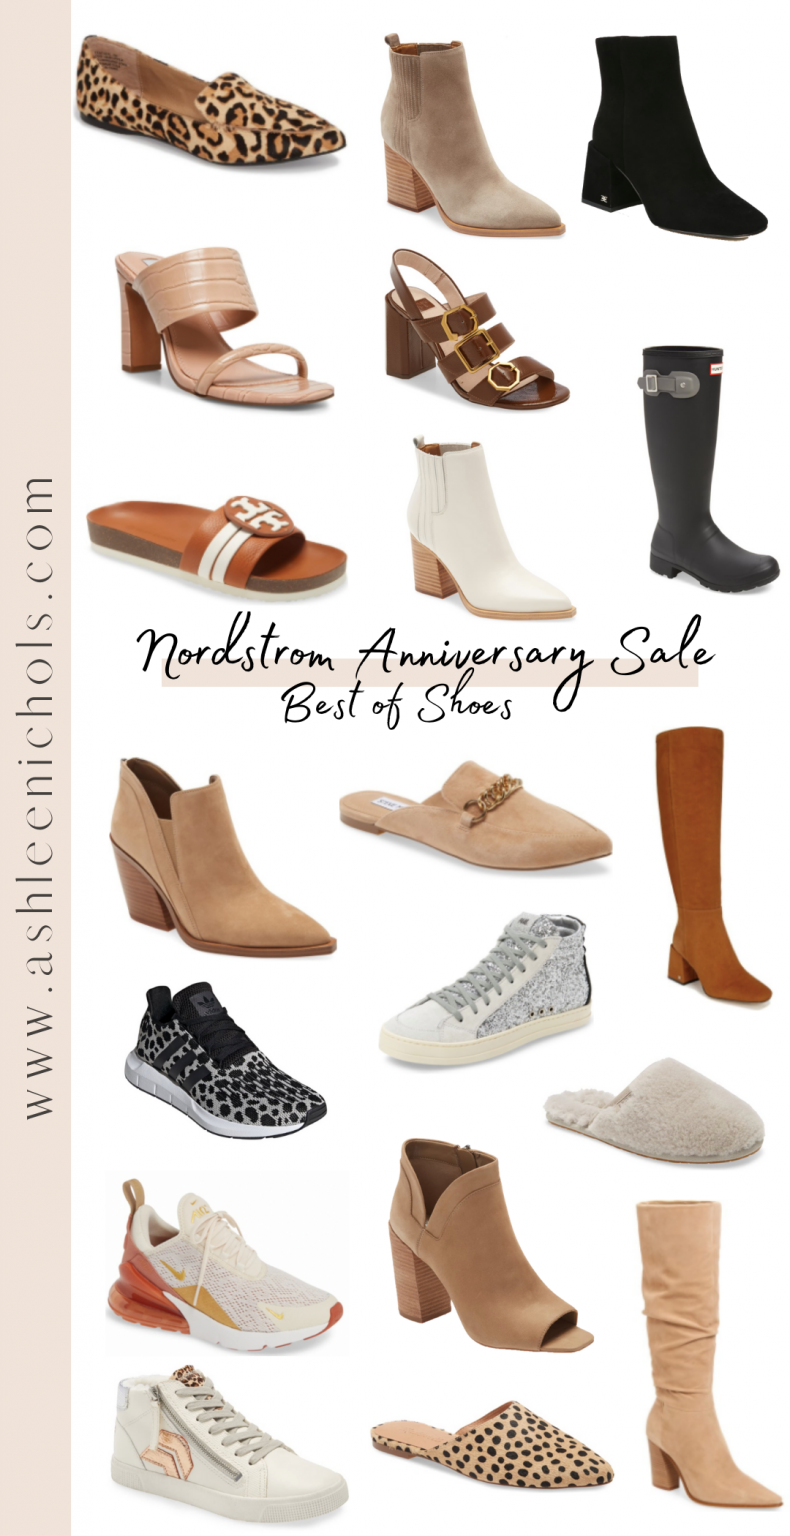 The Best of The Nordstrom Anniversary Sale 2020 - Ashlee Nichols